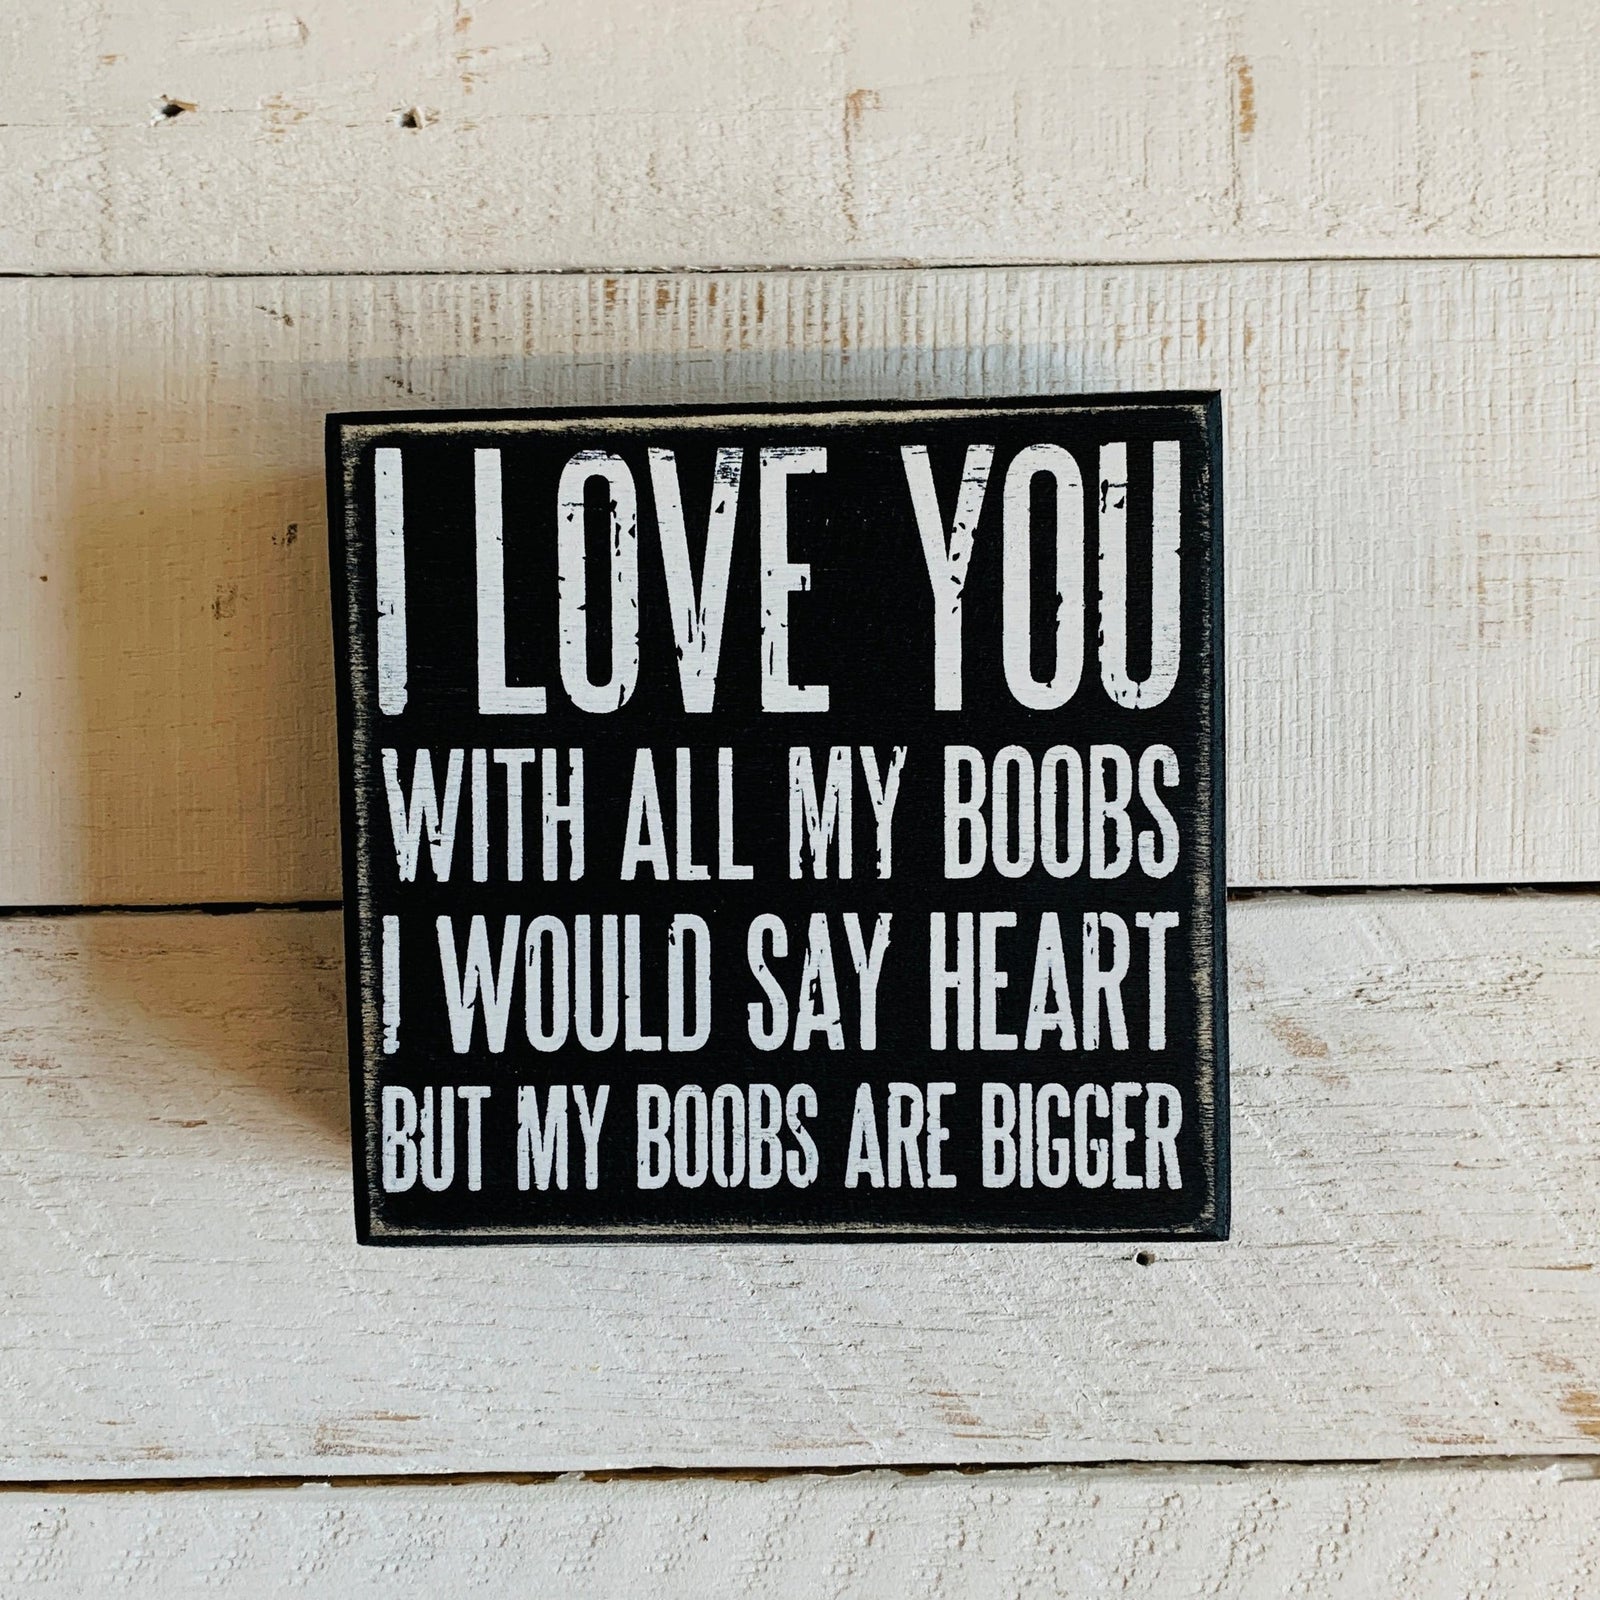 I Love You With All My Boobs - I Would Say Heart But My Boobs Are Bigger Wooden Box Sign Decor | 4.50" x 4.25"